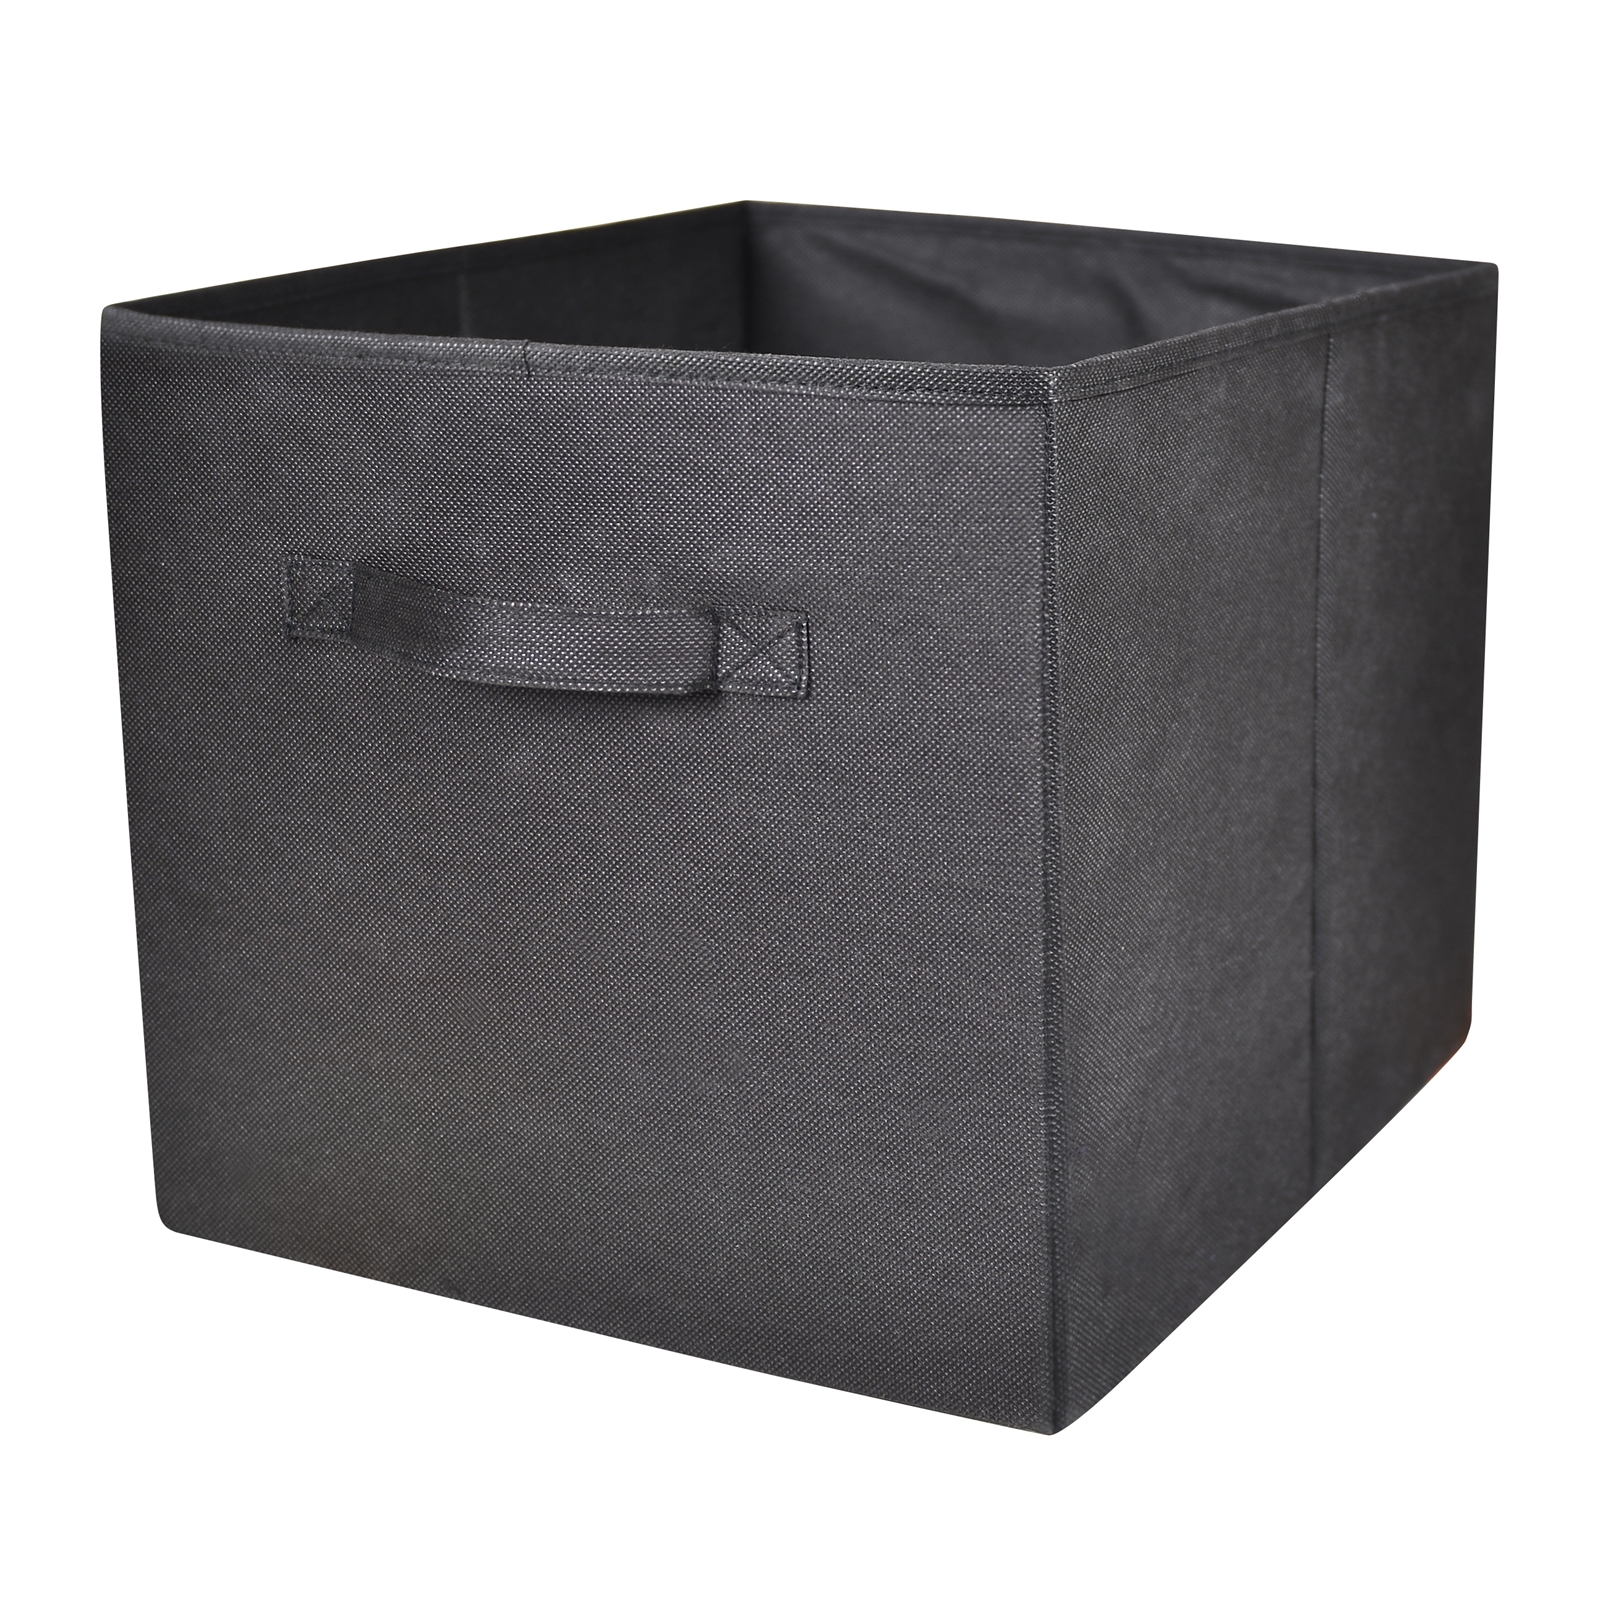 Clever Cube 330 x 330 x 370mm Black Fabric Insert | Bunnings Warehouse